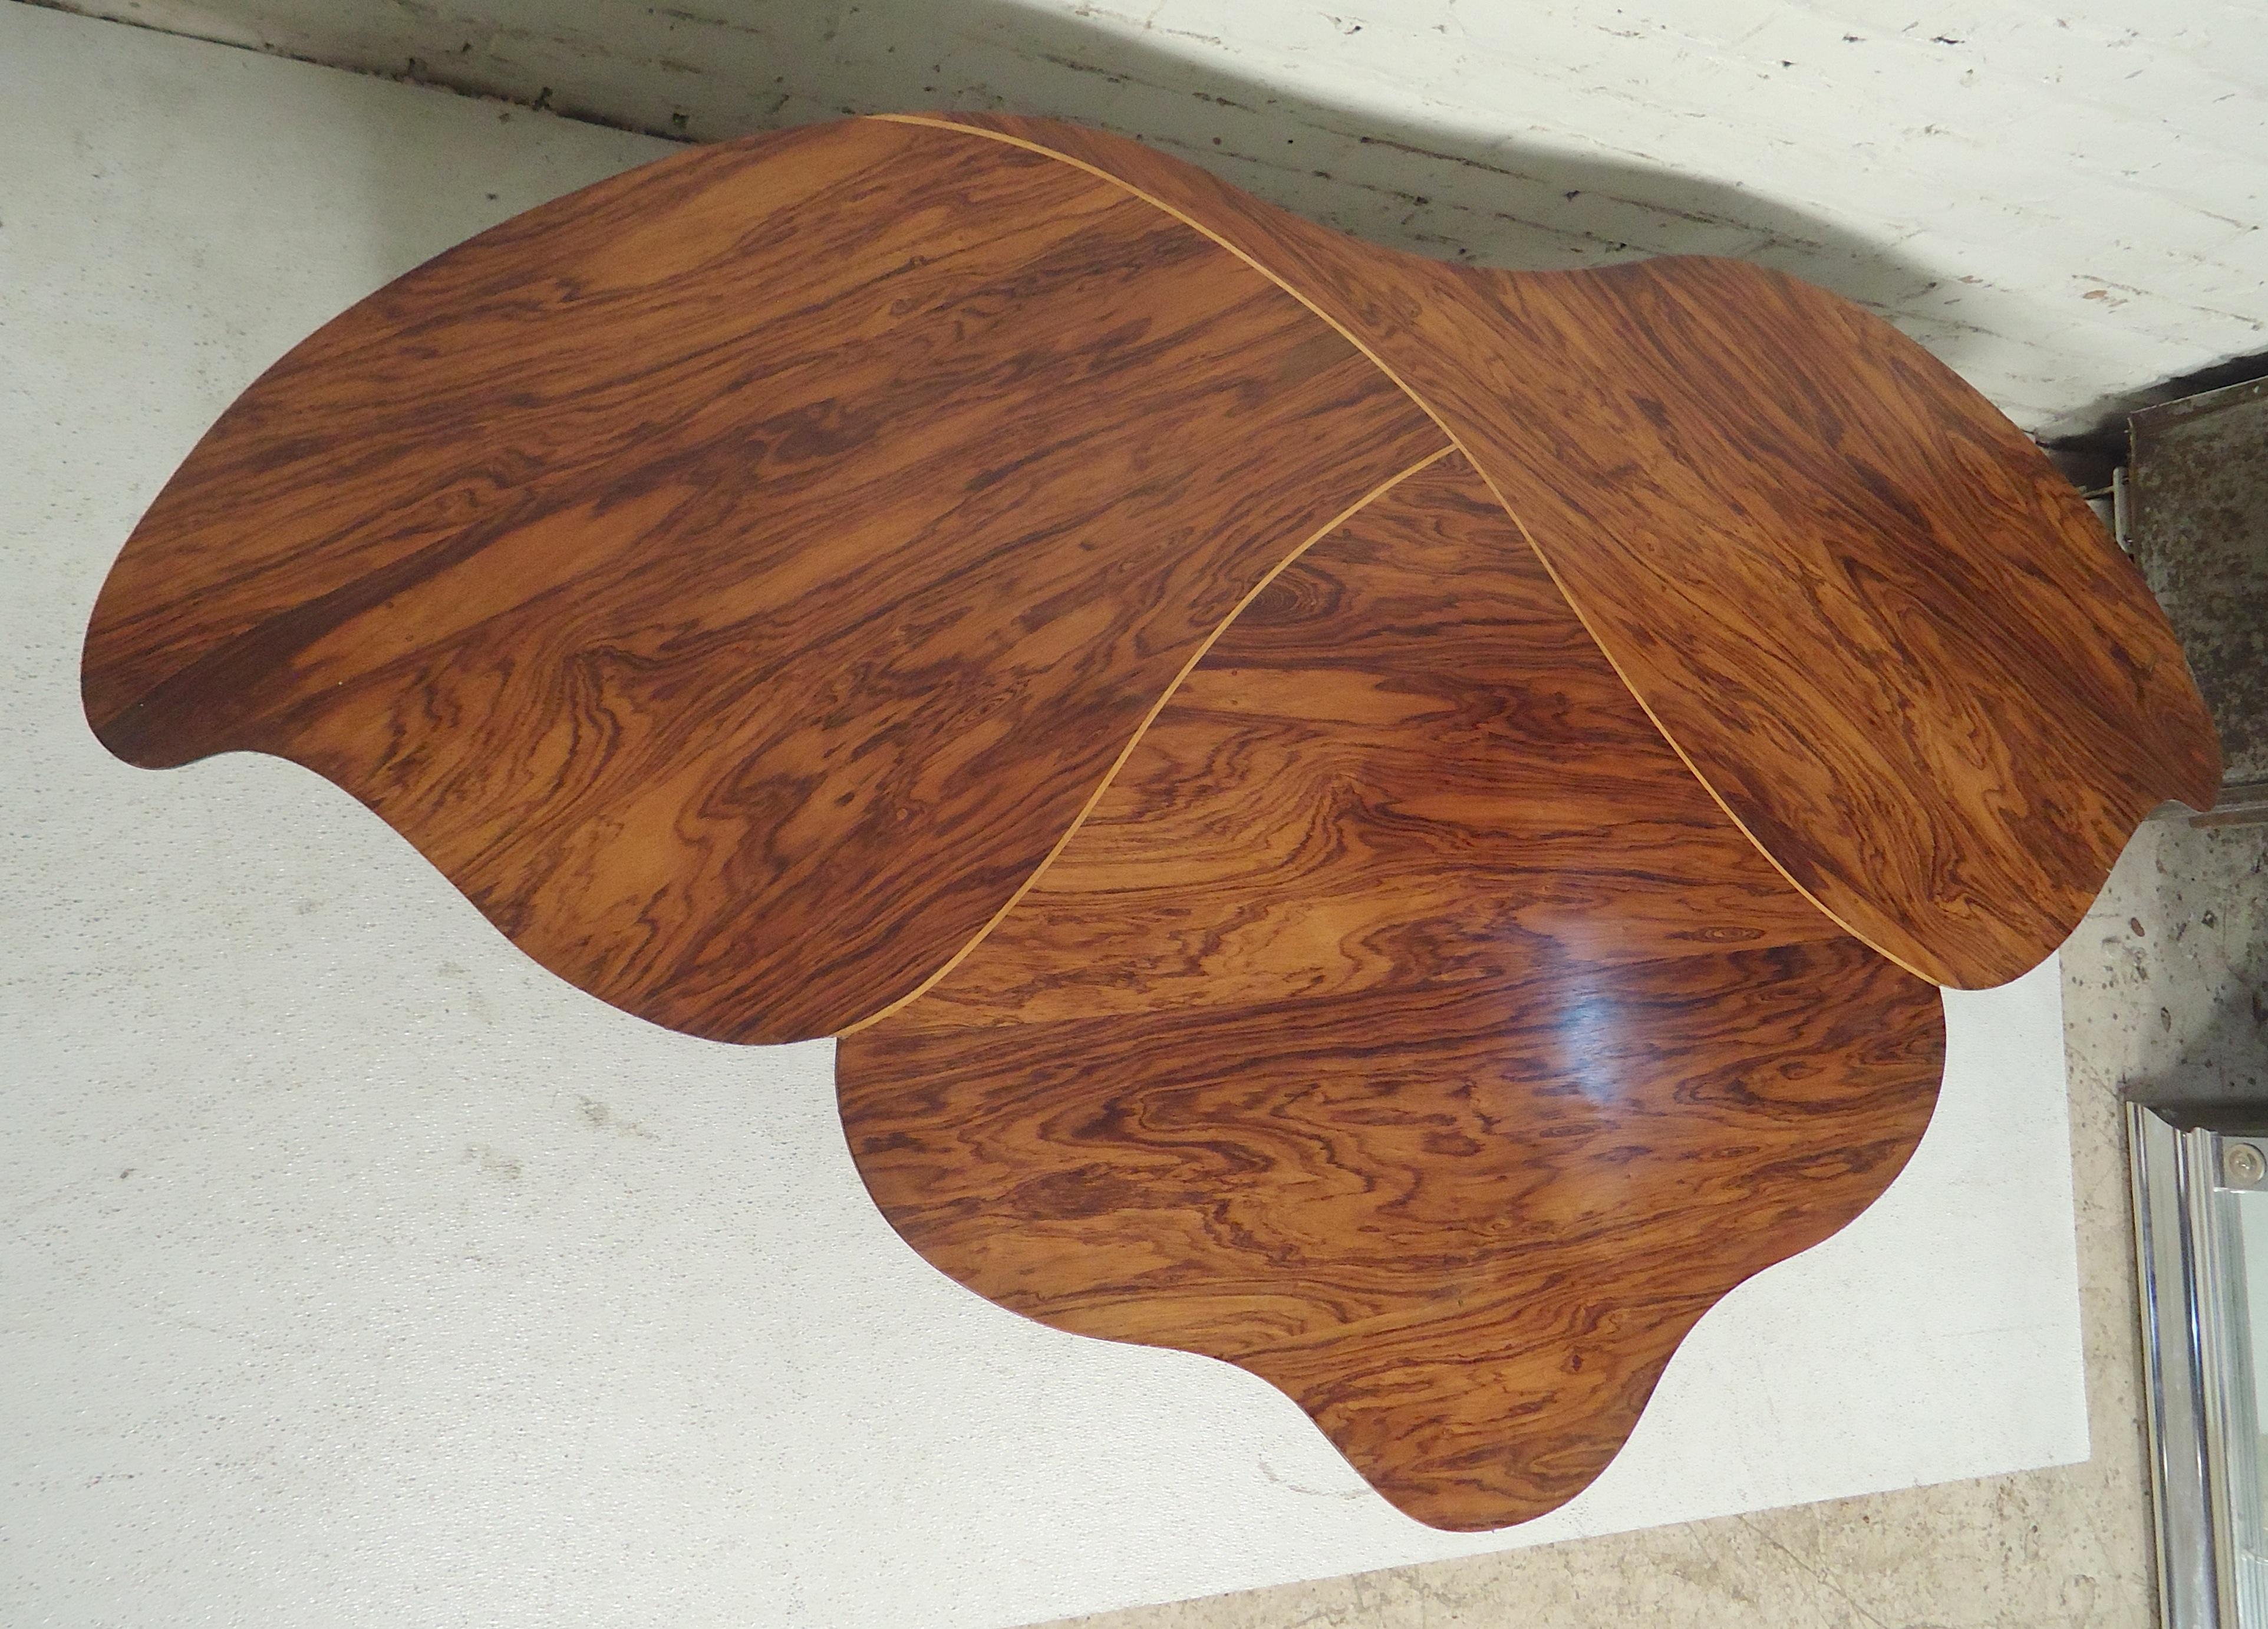 Beautiful coffee table with rosewood grain and inlay design. Painted legs and flower shape design makes for an attractive living room table.

(Please confirm item location - NY or NJ - with dealer).
 